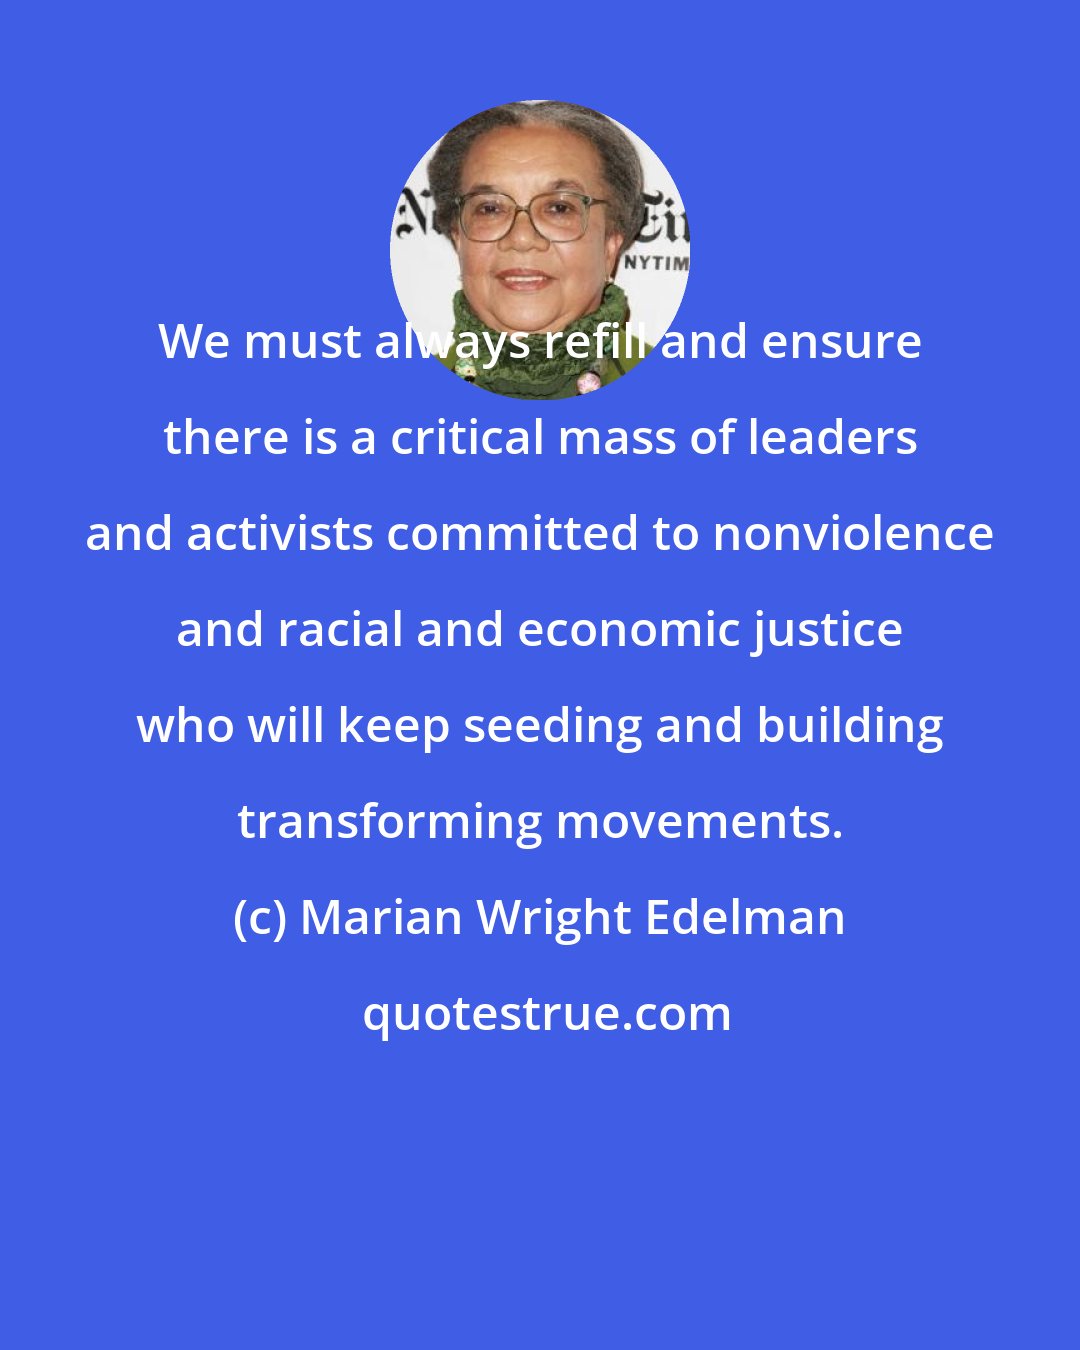 Marian Wright Edelman: We must always refill and ensure there is a critical mass of leaders and activists committed to nonviolence and racial and economic justice who will keep seeding and building transforming movements.